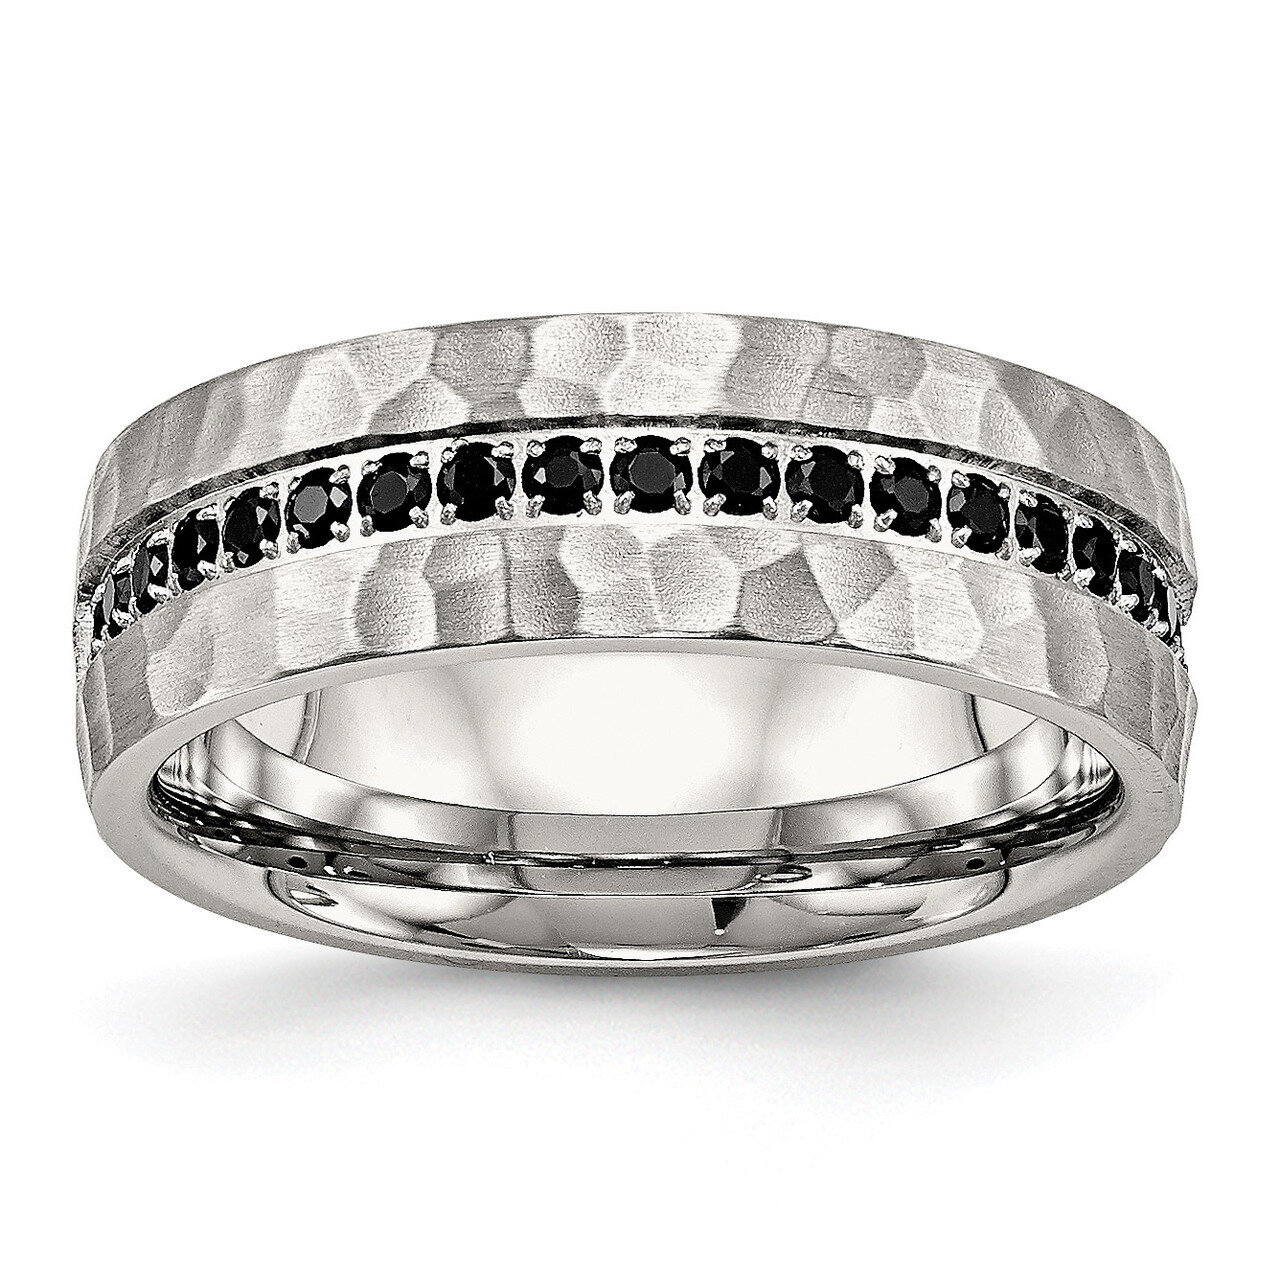 Black CZ Diamond Hammered Ring Stainless Steel Brushed and Polished SR540